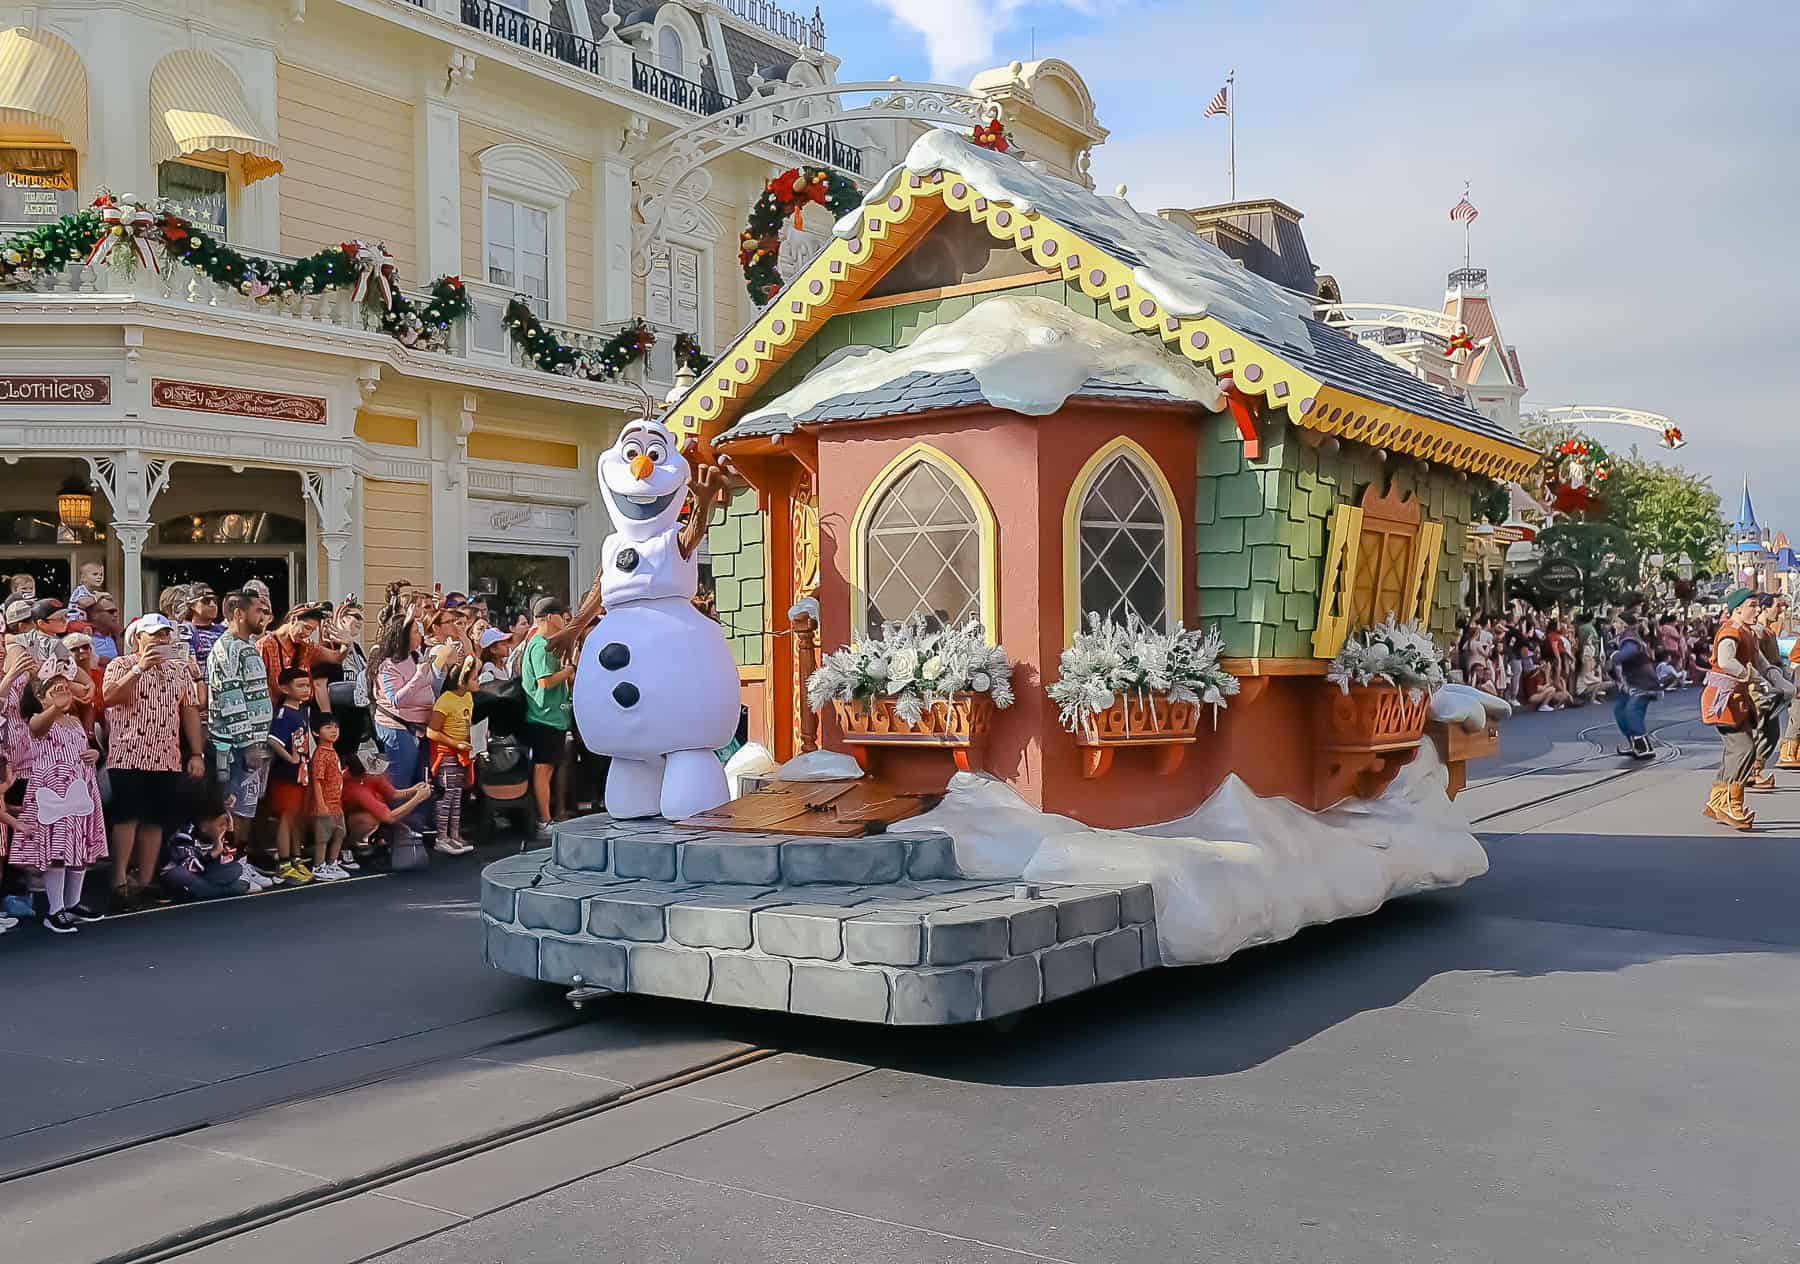 Olaf waves to the crowd from his float during a daytime performance. 